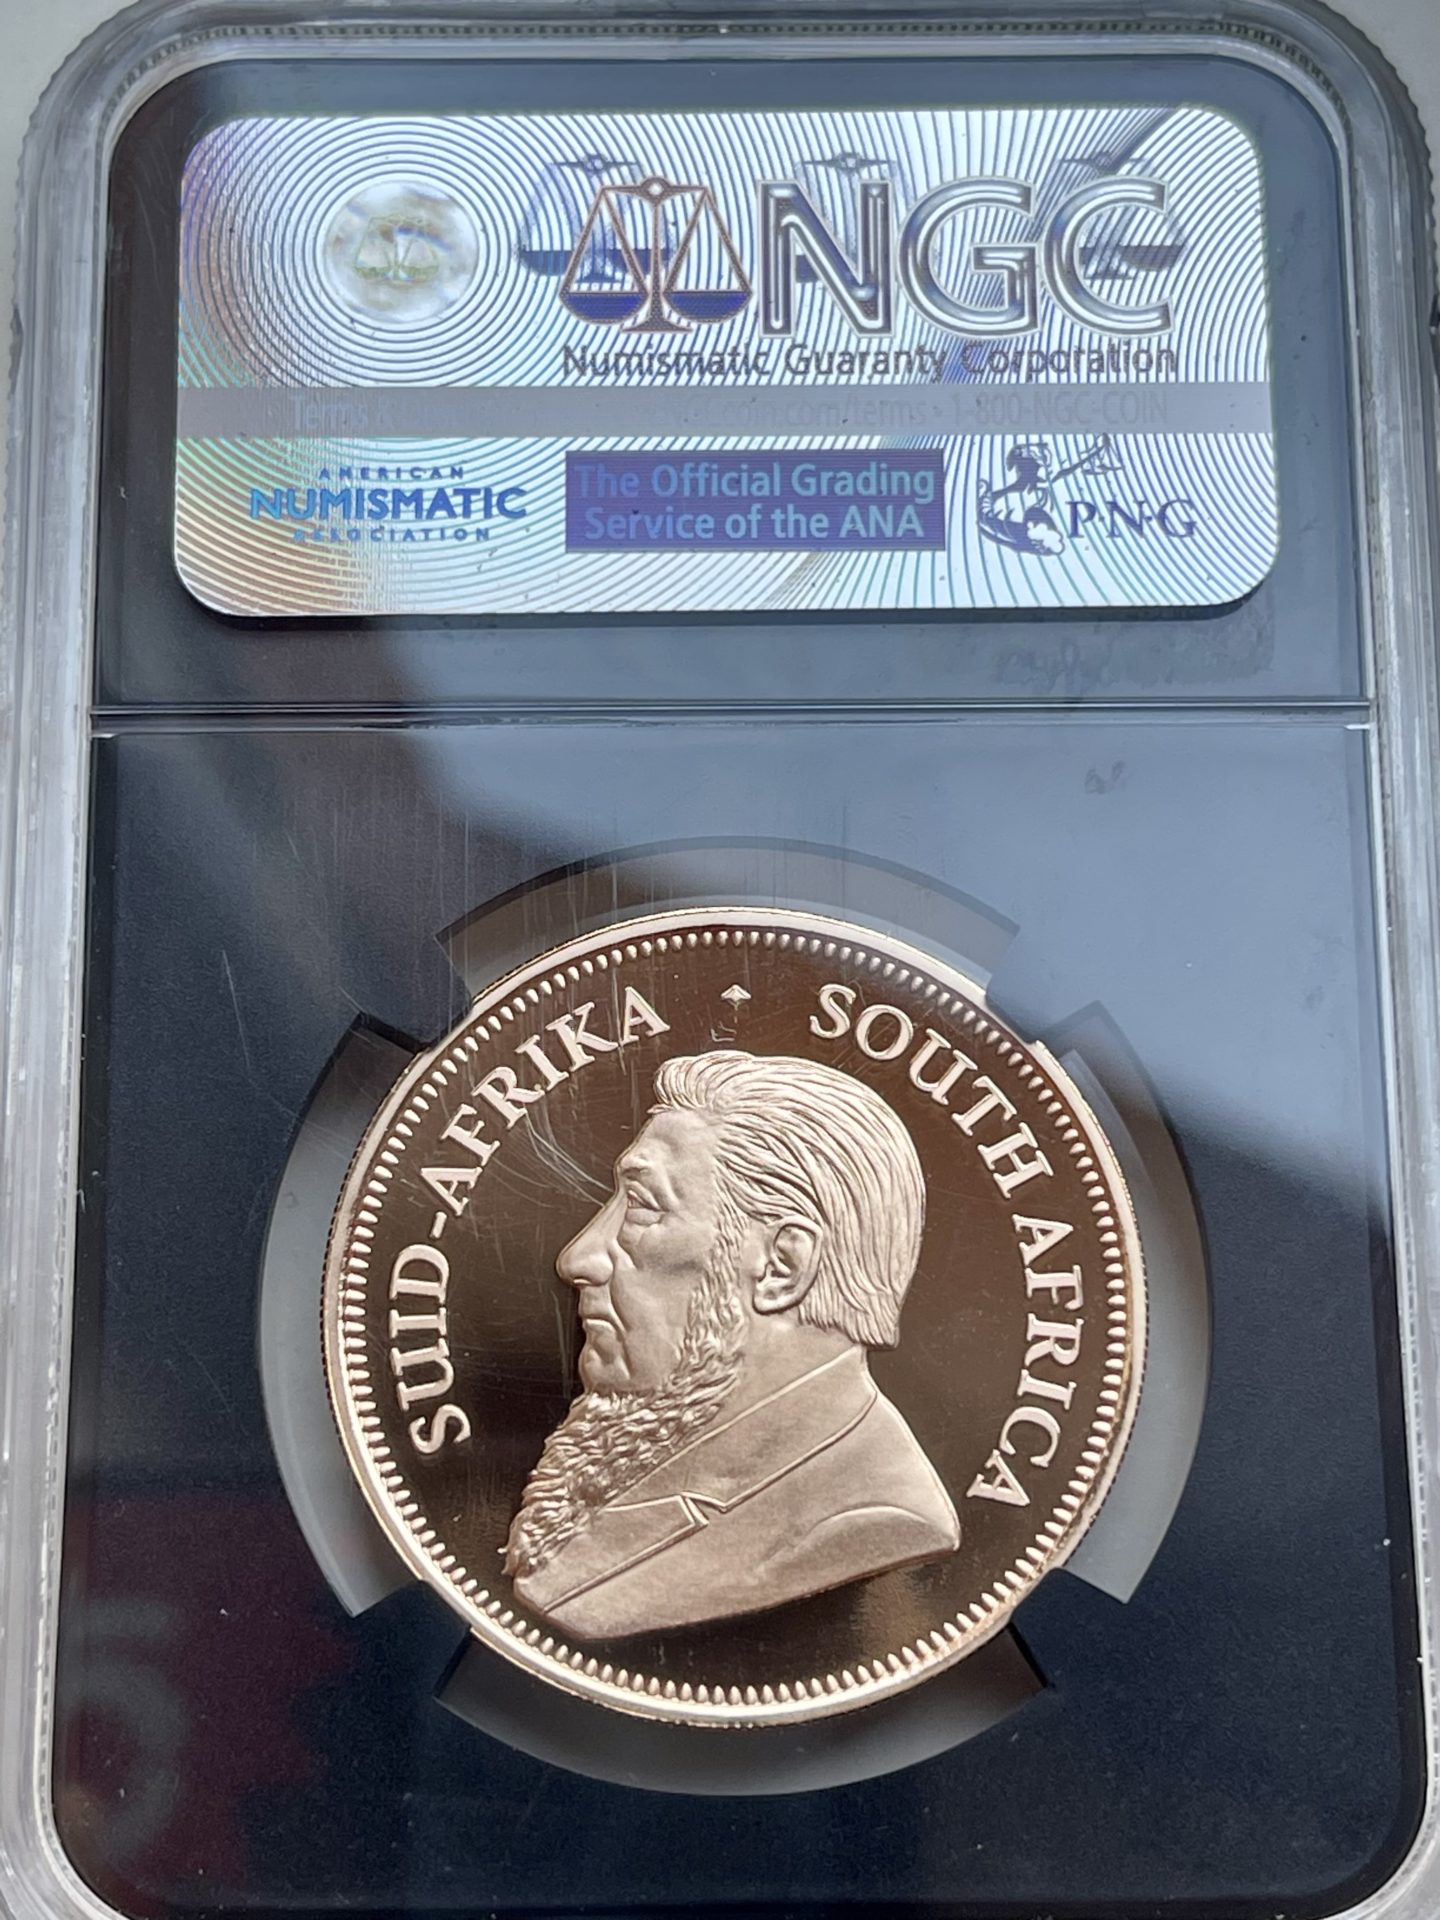 Krugerrand 2017 50th anniversary first releases NGC PF 70 UCAM